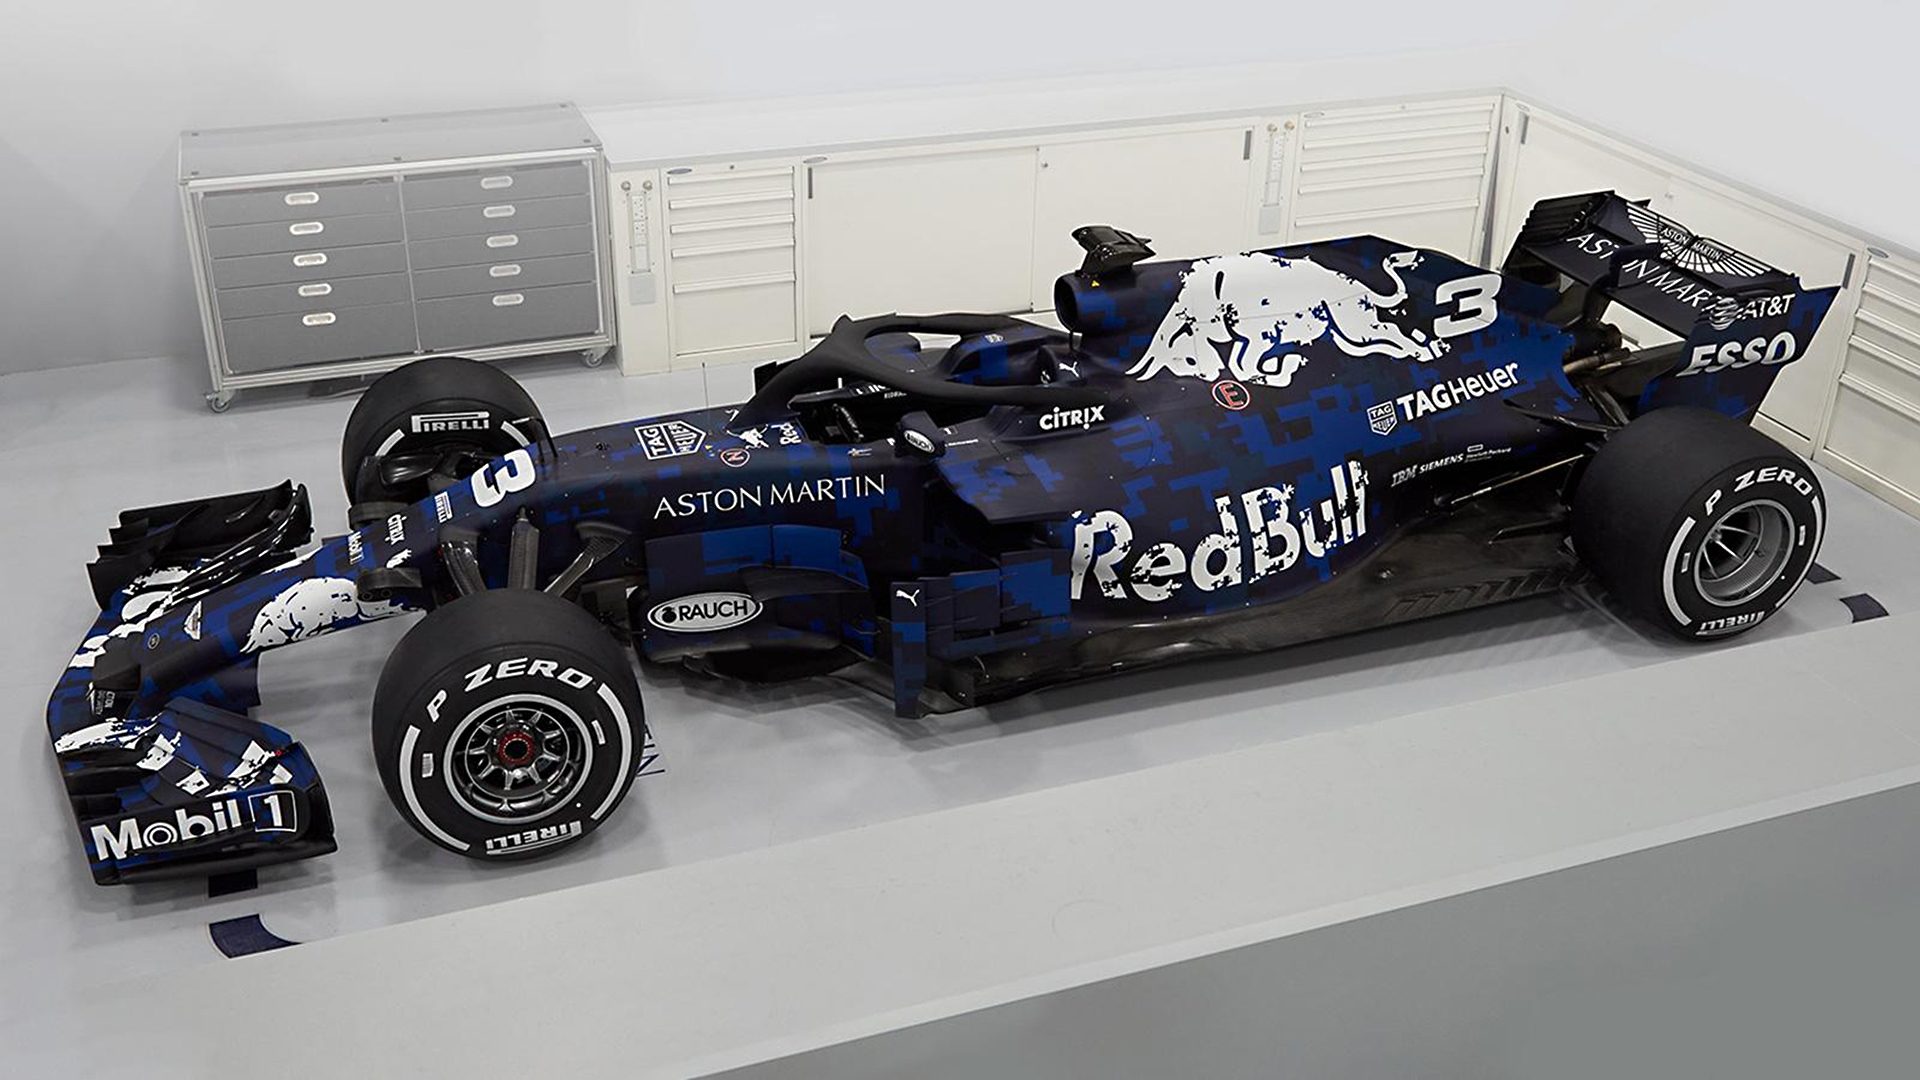 https://www.gtplanet.net/red-bull-racing-launches-rb14-2018-f1-season/am-red-bull-racing-rb14/